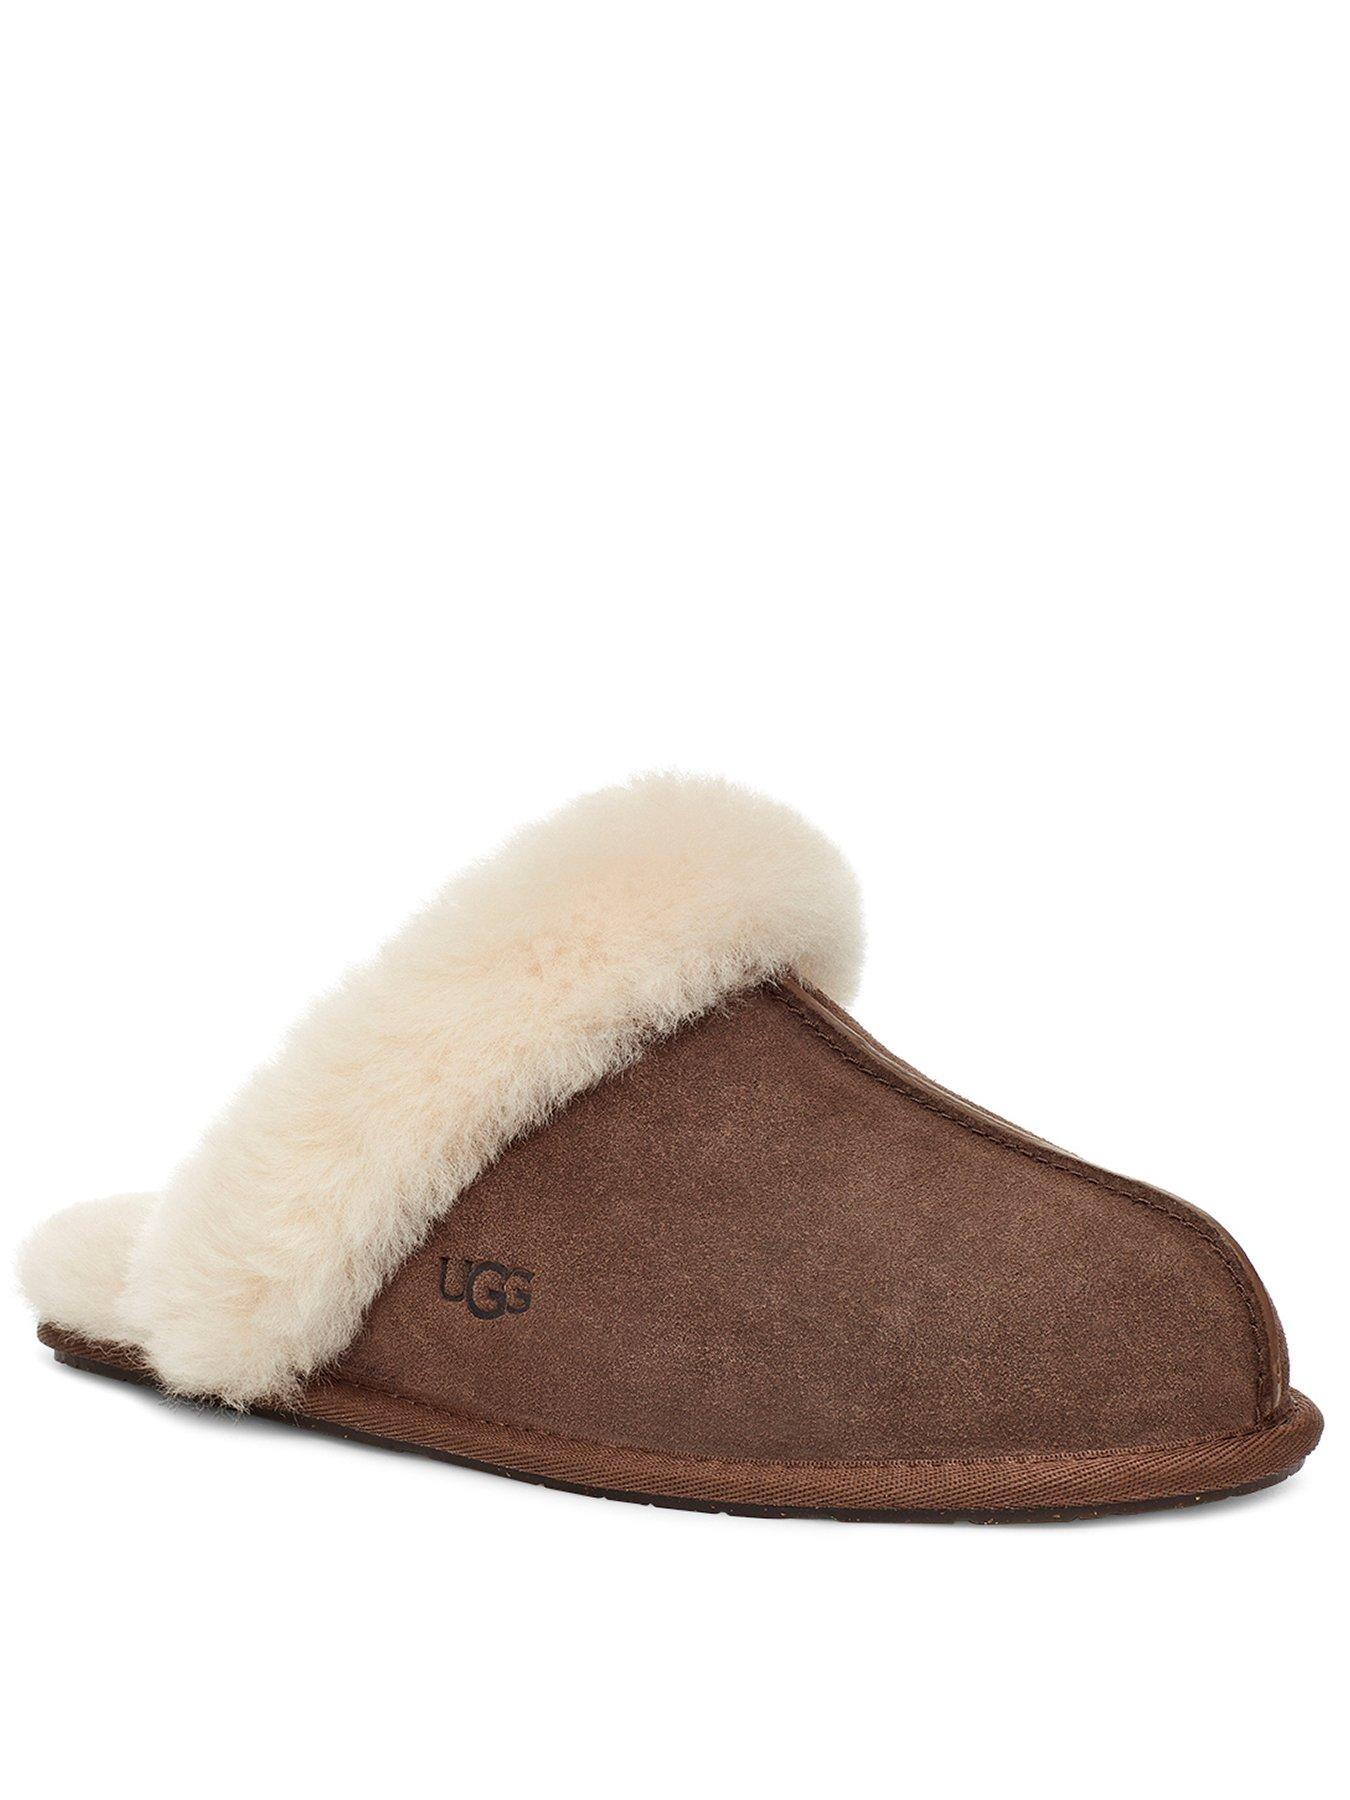 brown thomas ugg slippers